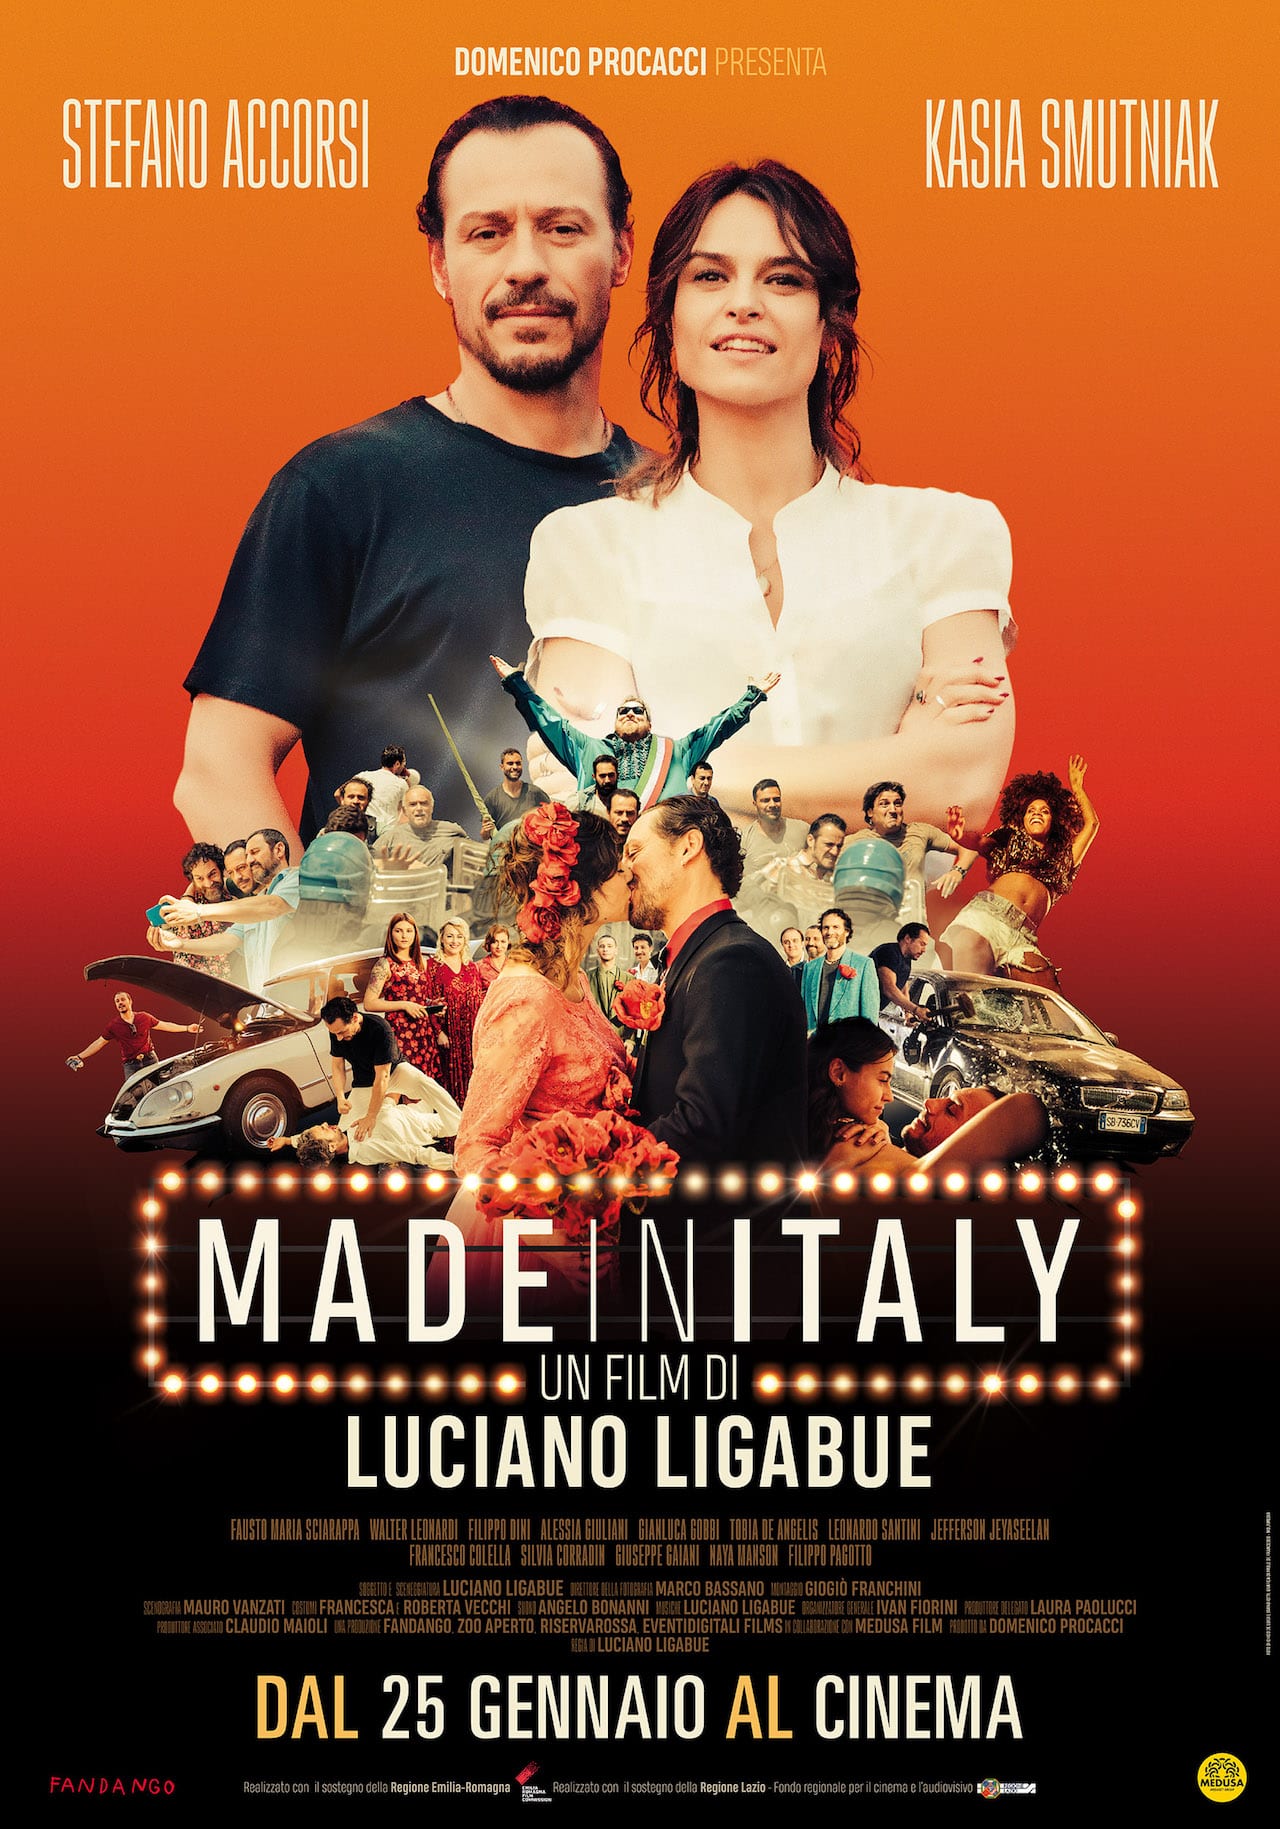 made in Italy poster, cinematographe